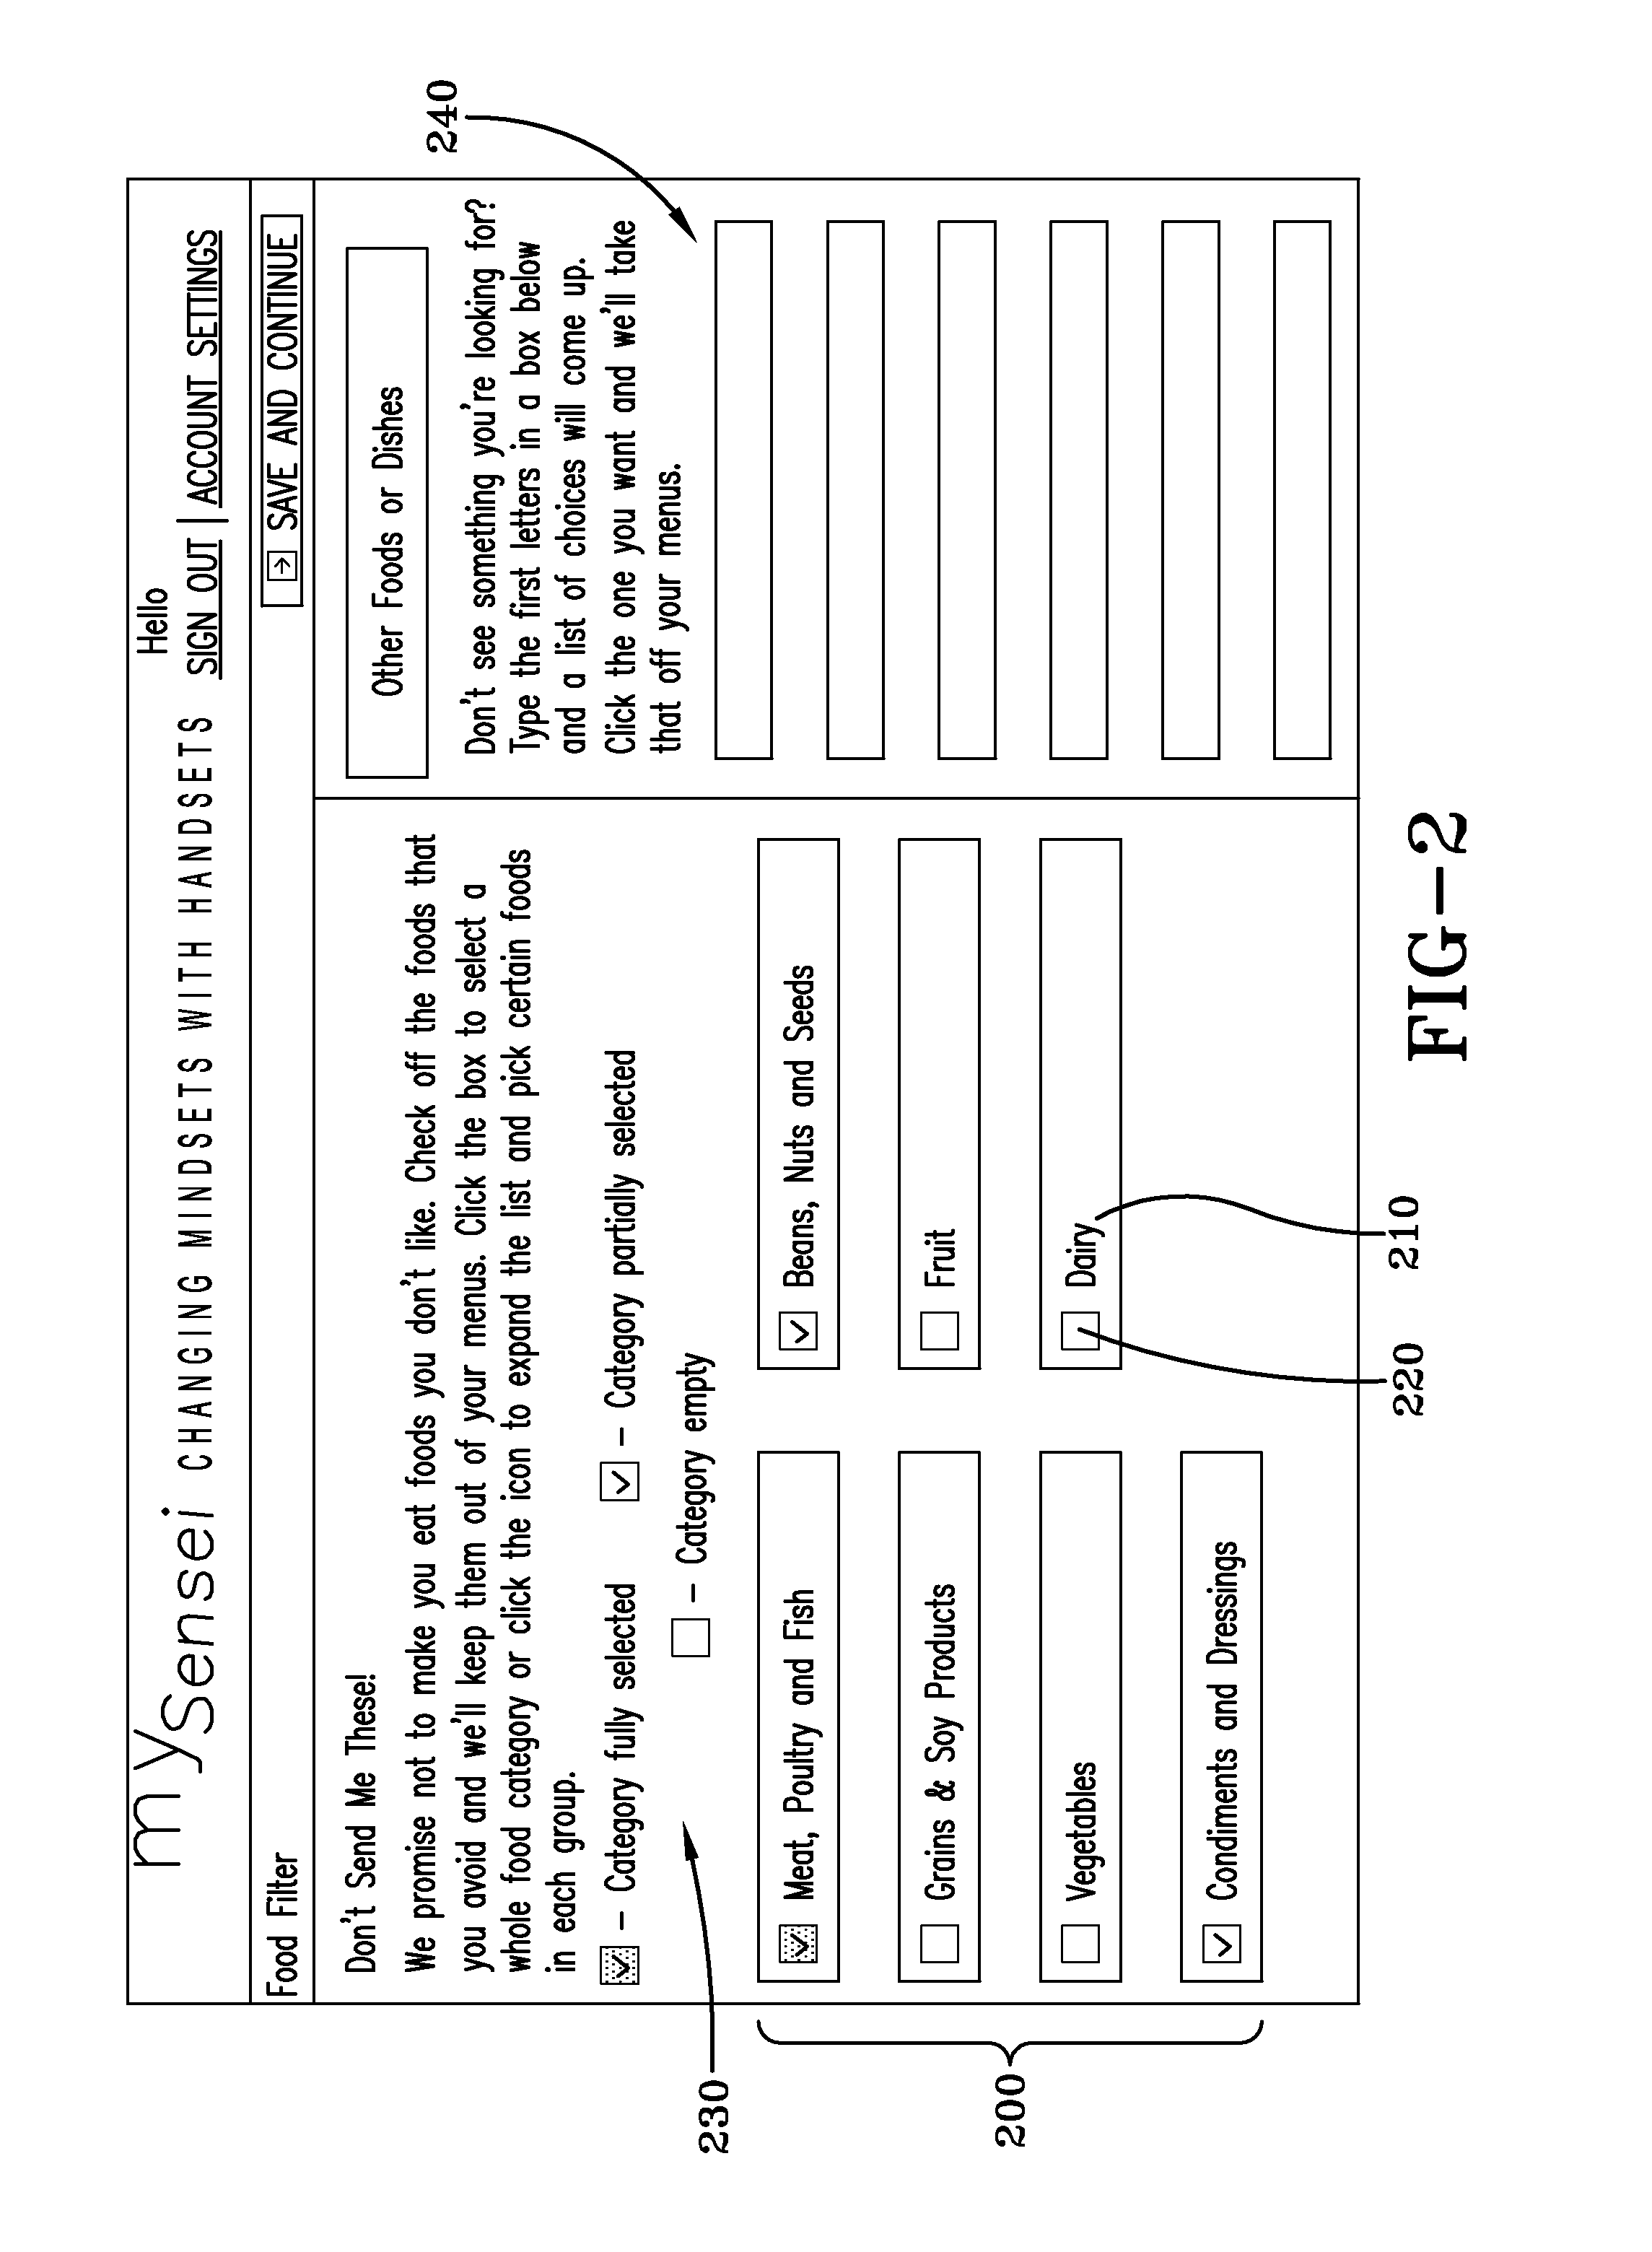 System and method for automatically defining, creating, and managing meals